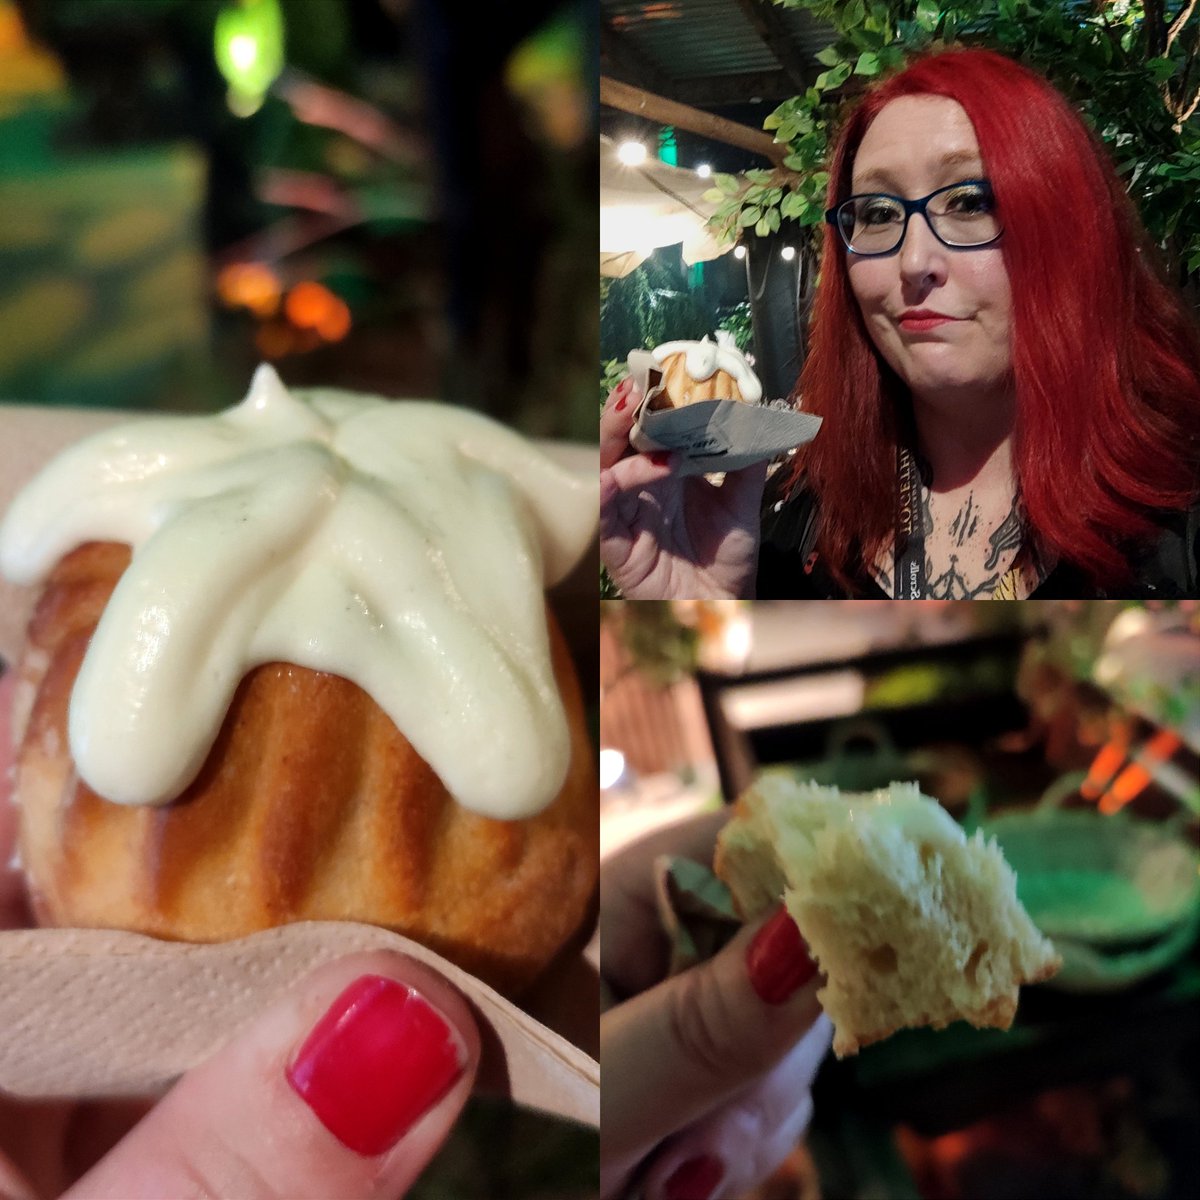 #ESO10 definitely wouldn't be the same if it didn't have SWEETROLLS!!! 🍮 #ESOAmsterdam #ESOFam 💖